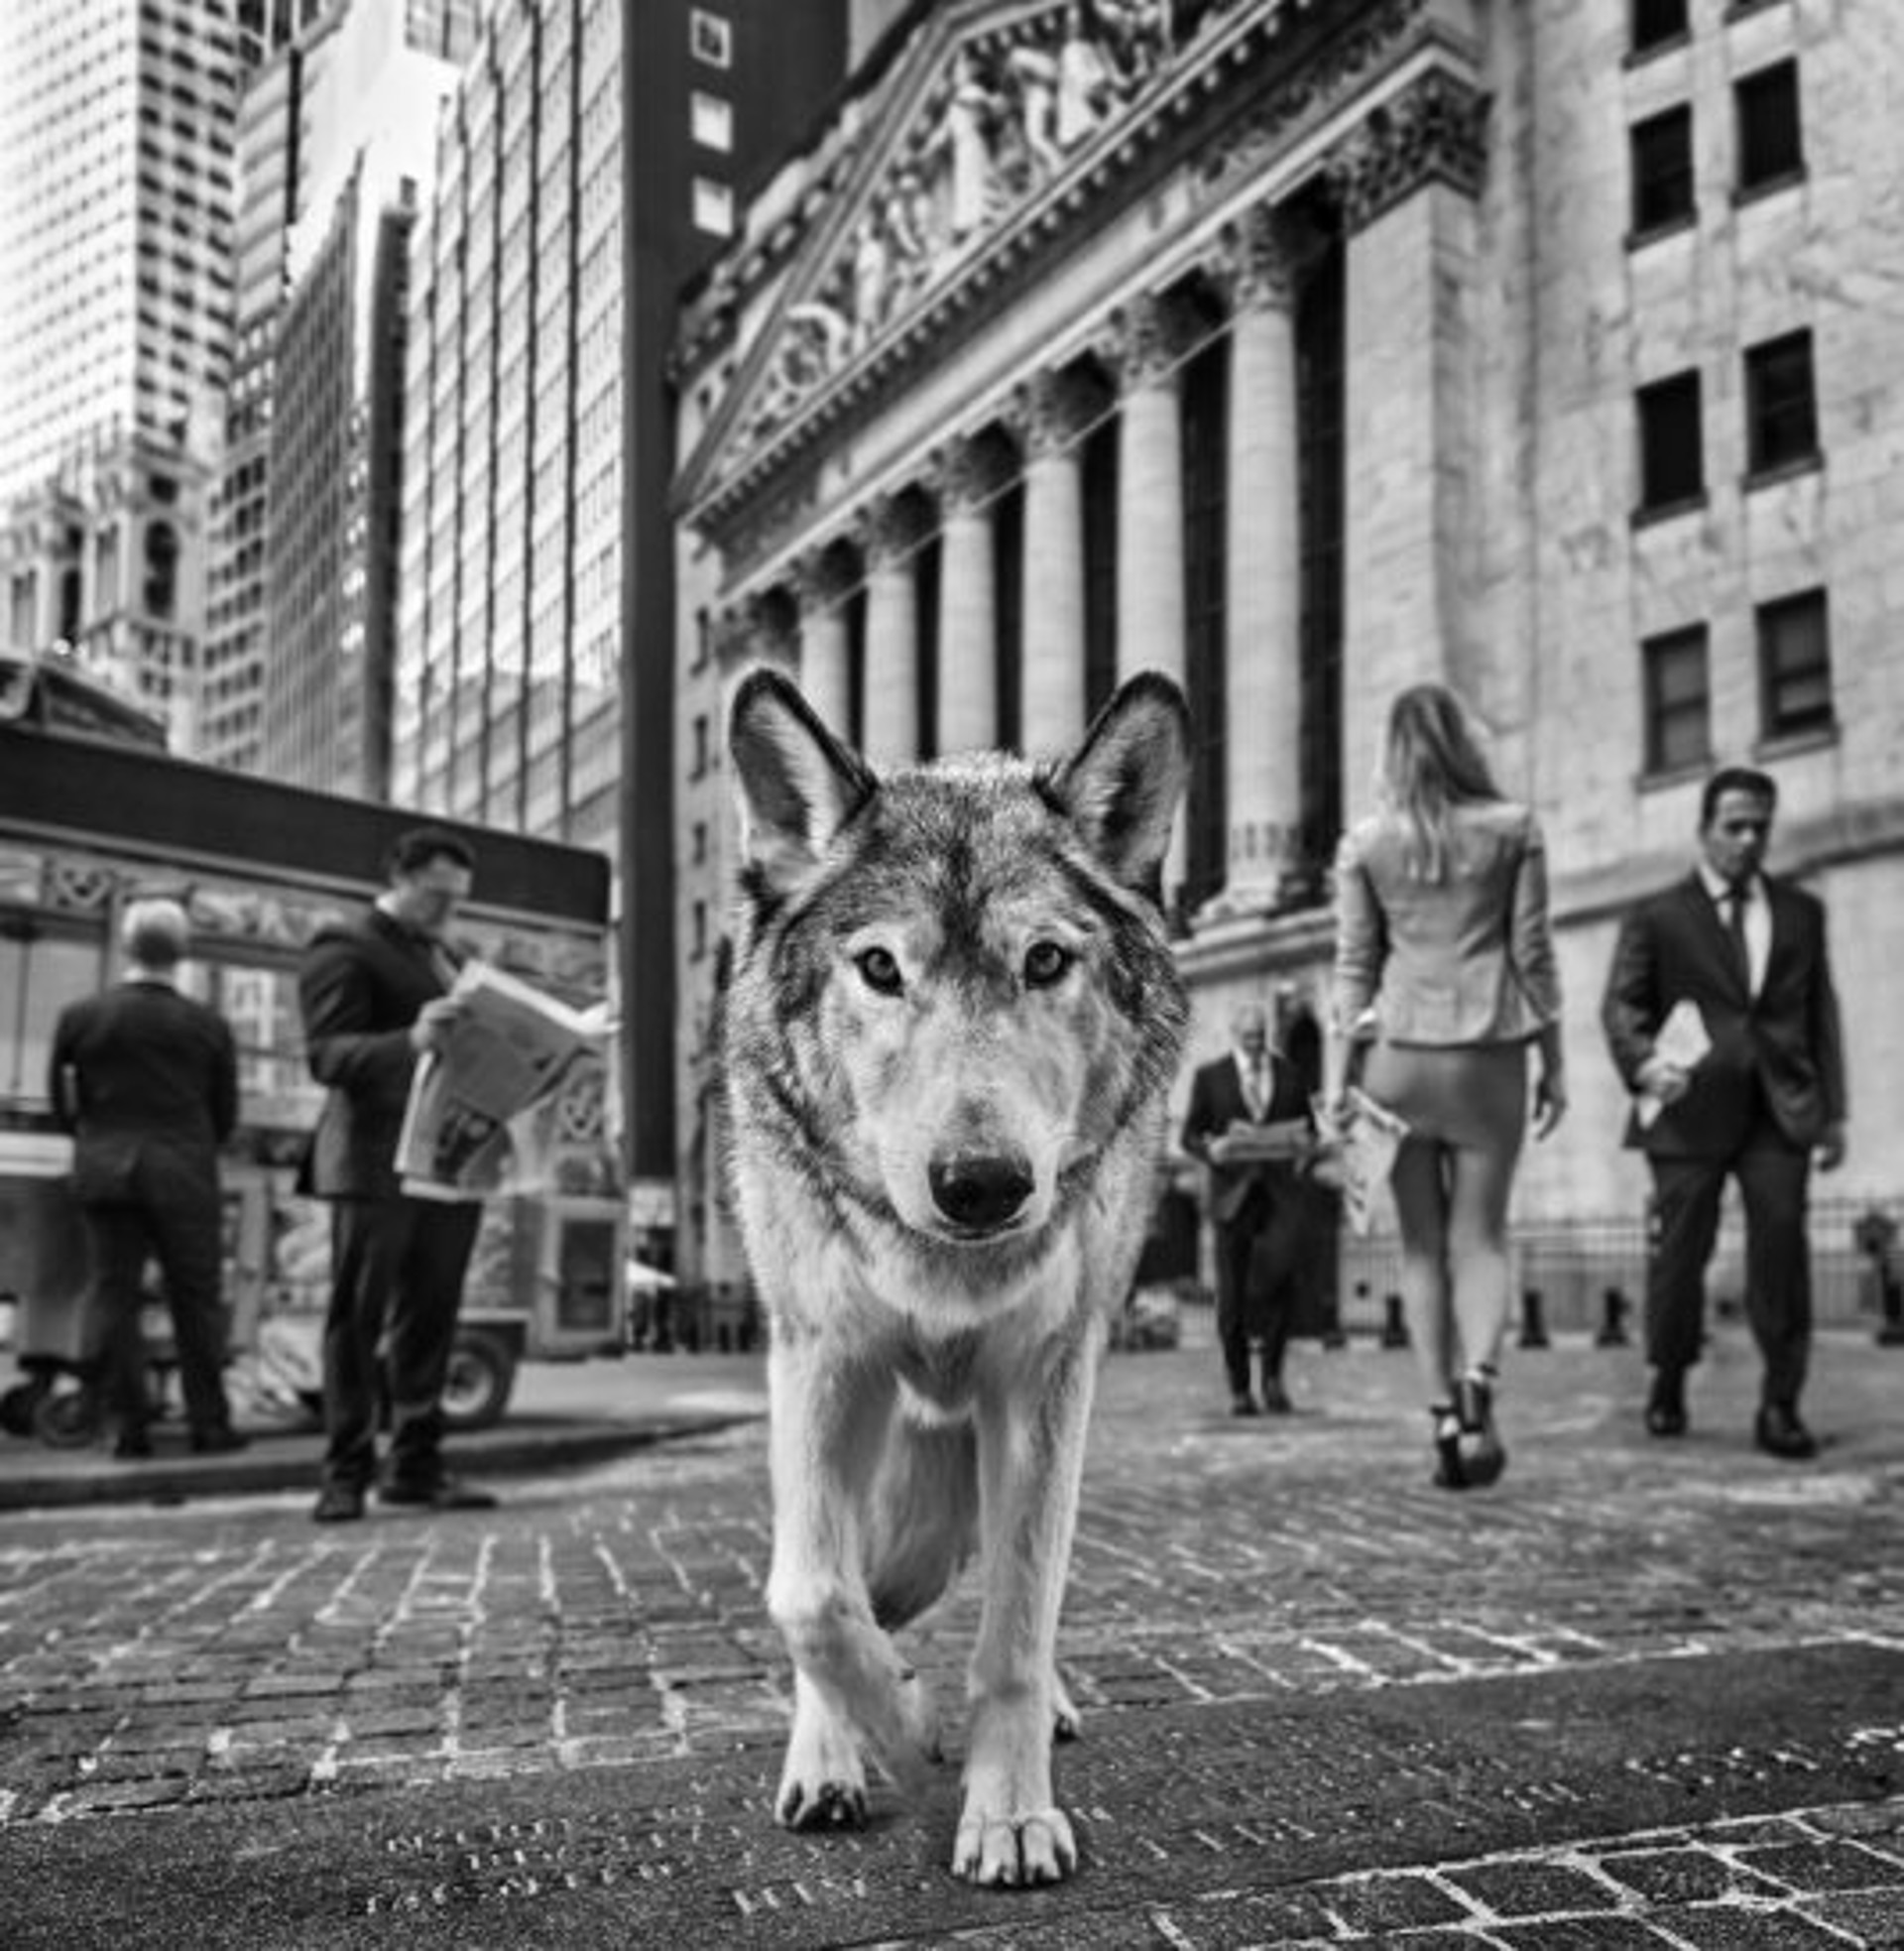 Once Upon a Time on Wall Street by David Yarrow